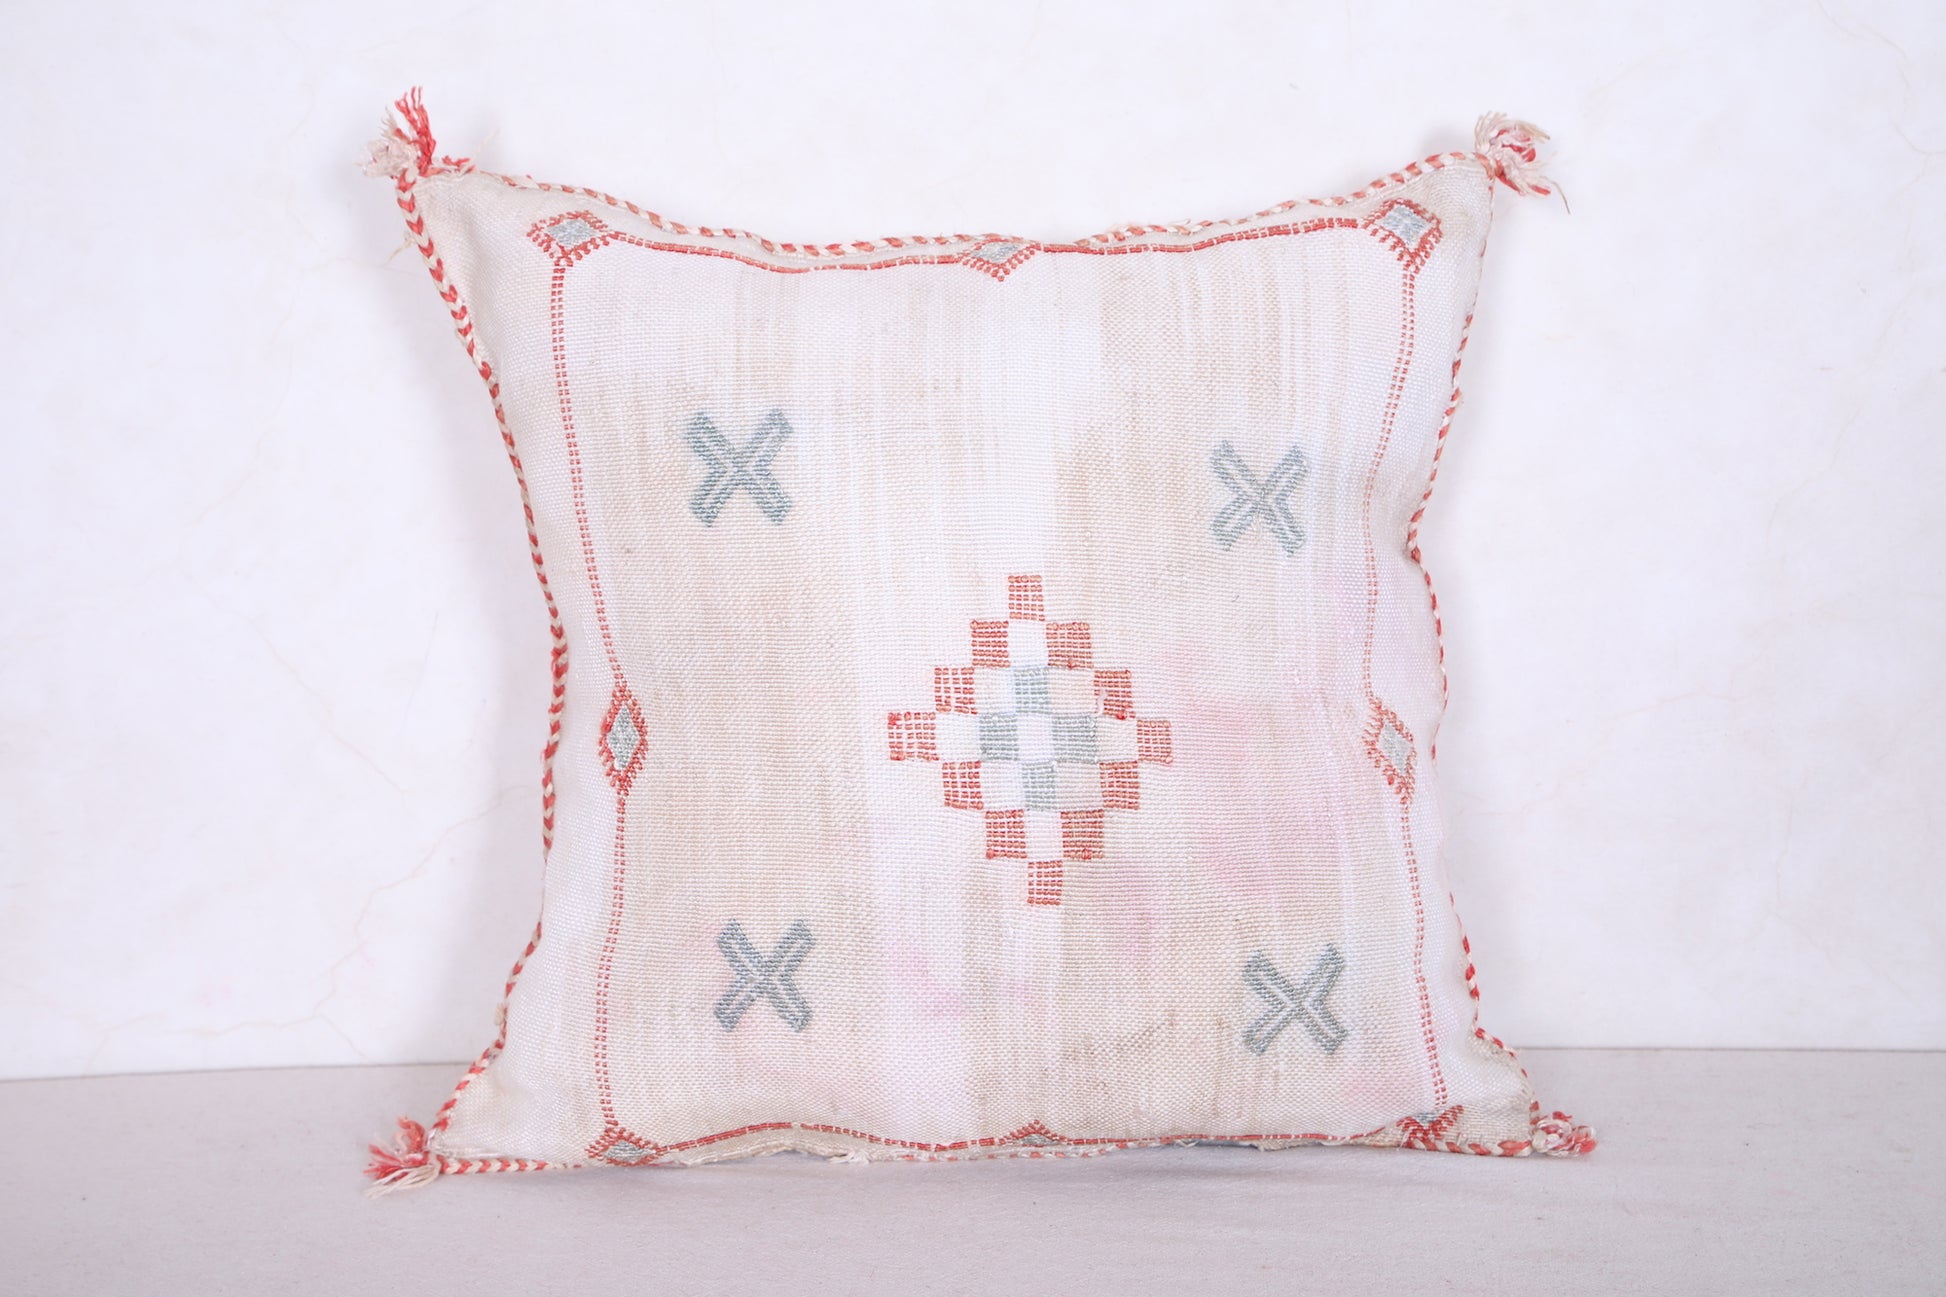 Moroccan handmade kilim pillow 17.7 INCHES X 17.7 INCHES